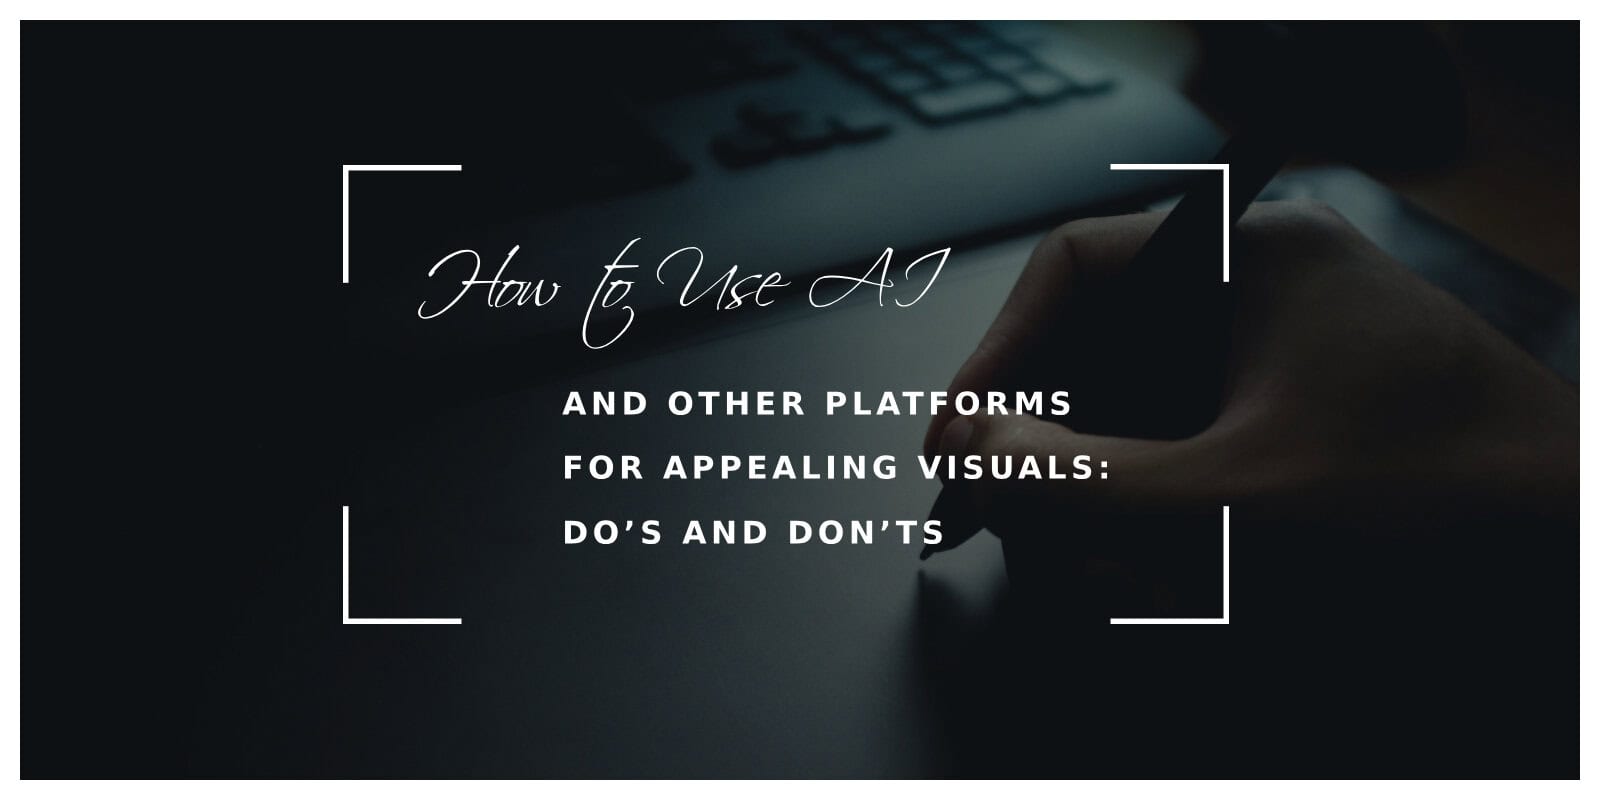 How to Use AI and Other Platforms for Appealing Visuals: Do’s and Don’ts